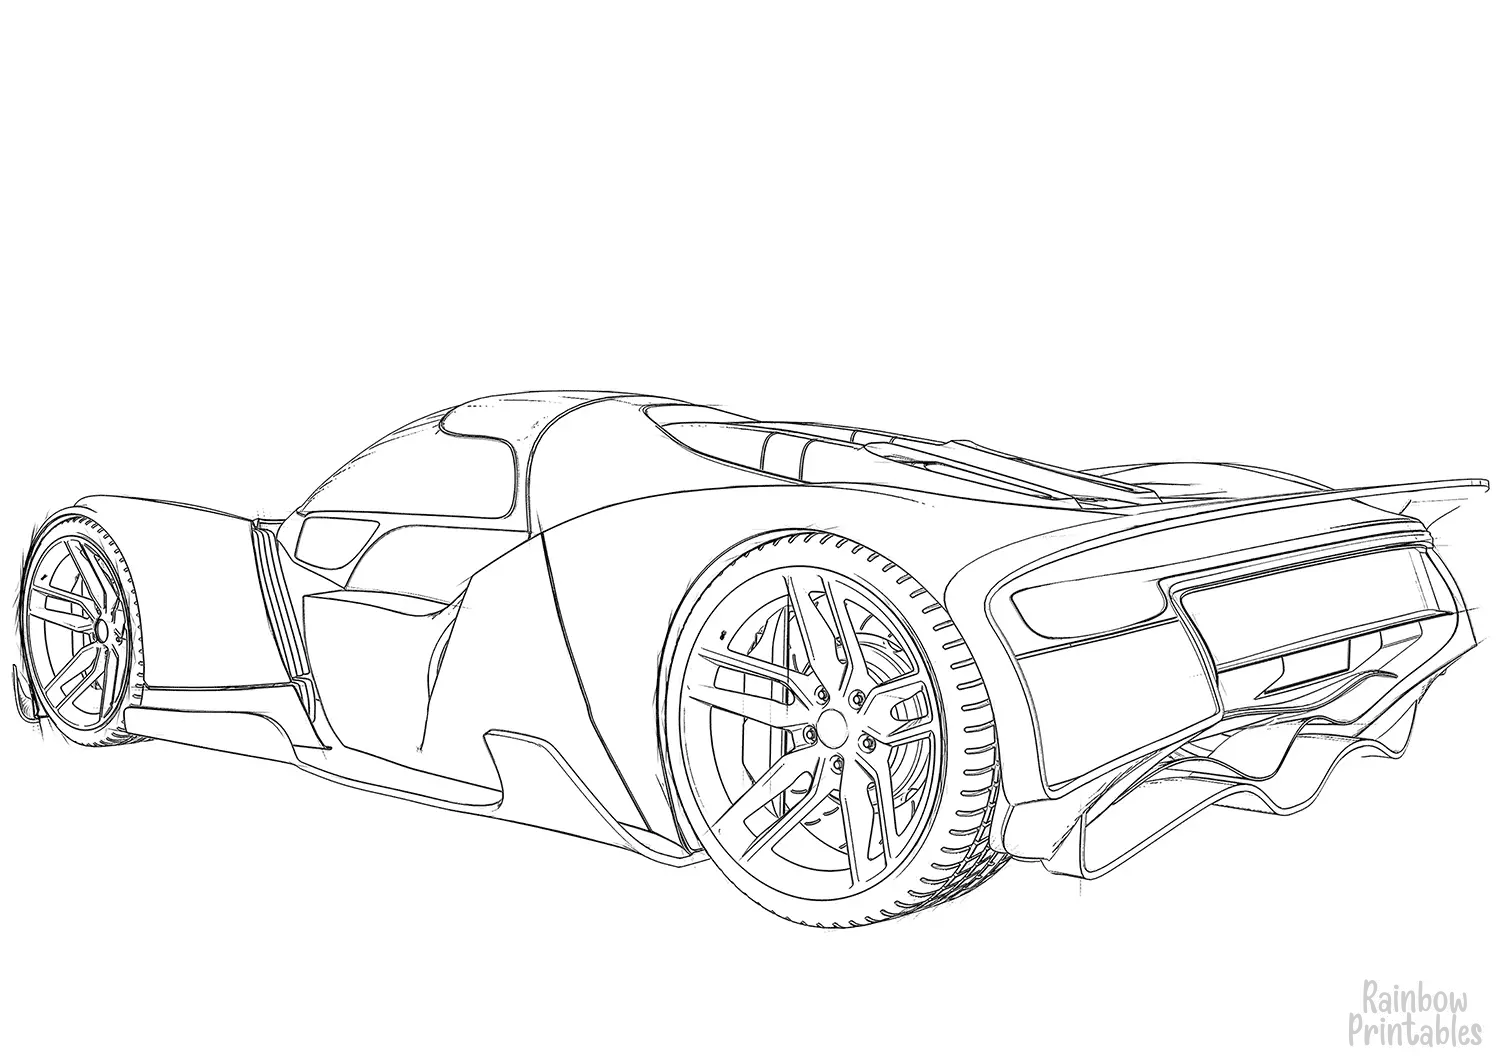 SPORTS-CAR RACER Racecars Clipart Coloring Pages for Kids Adults Art Activities Line Art